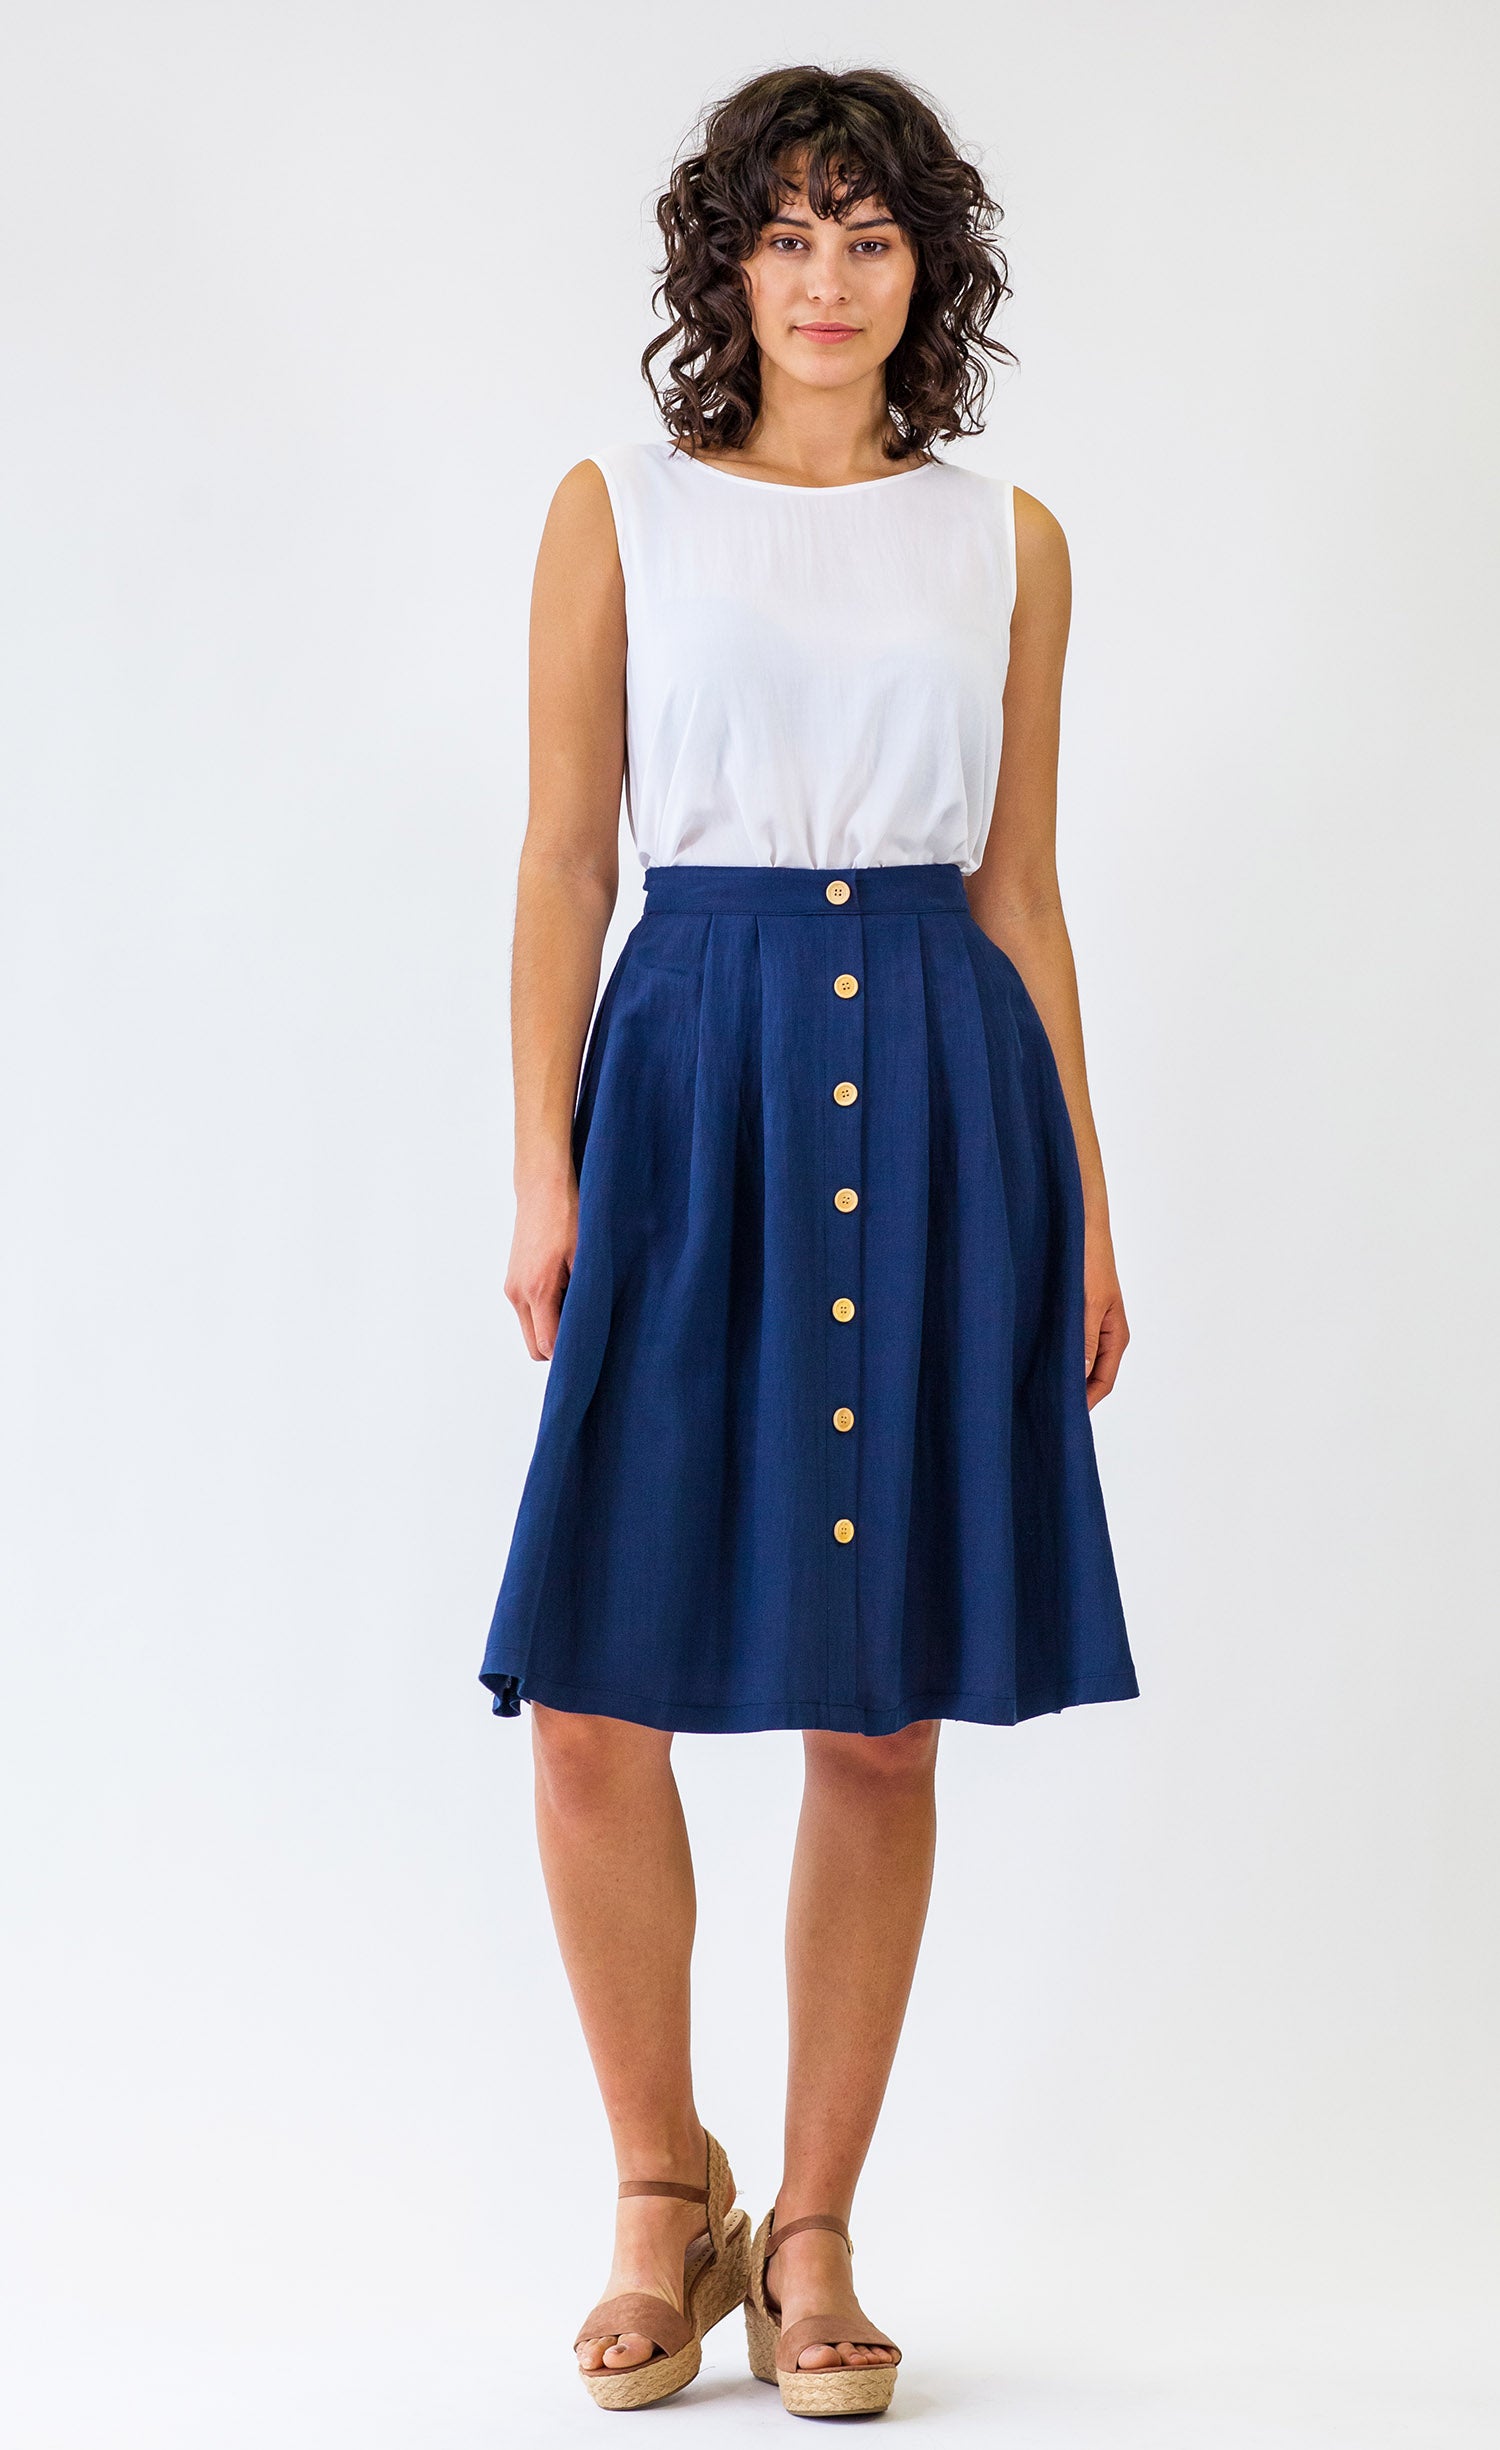 The Oceane Skirt - Pink Martini Collection